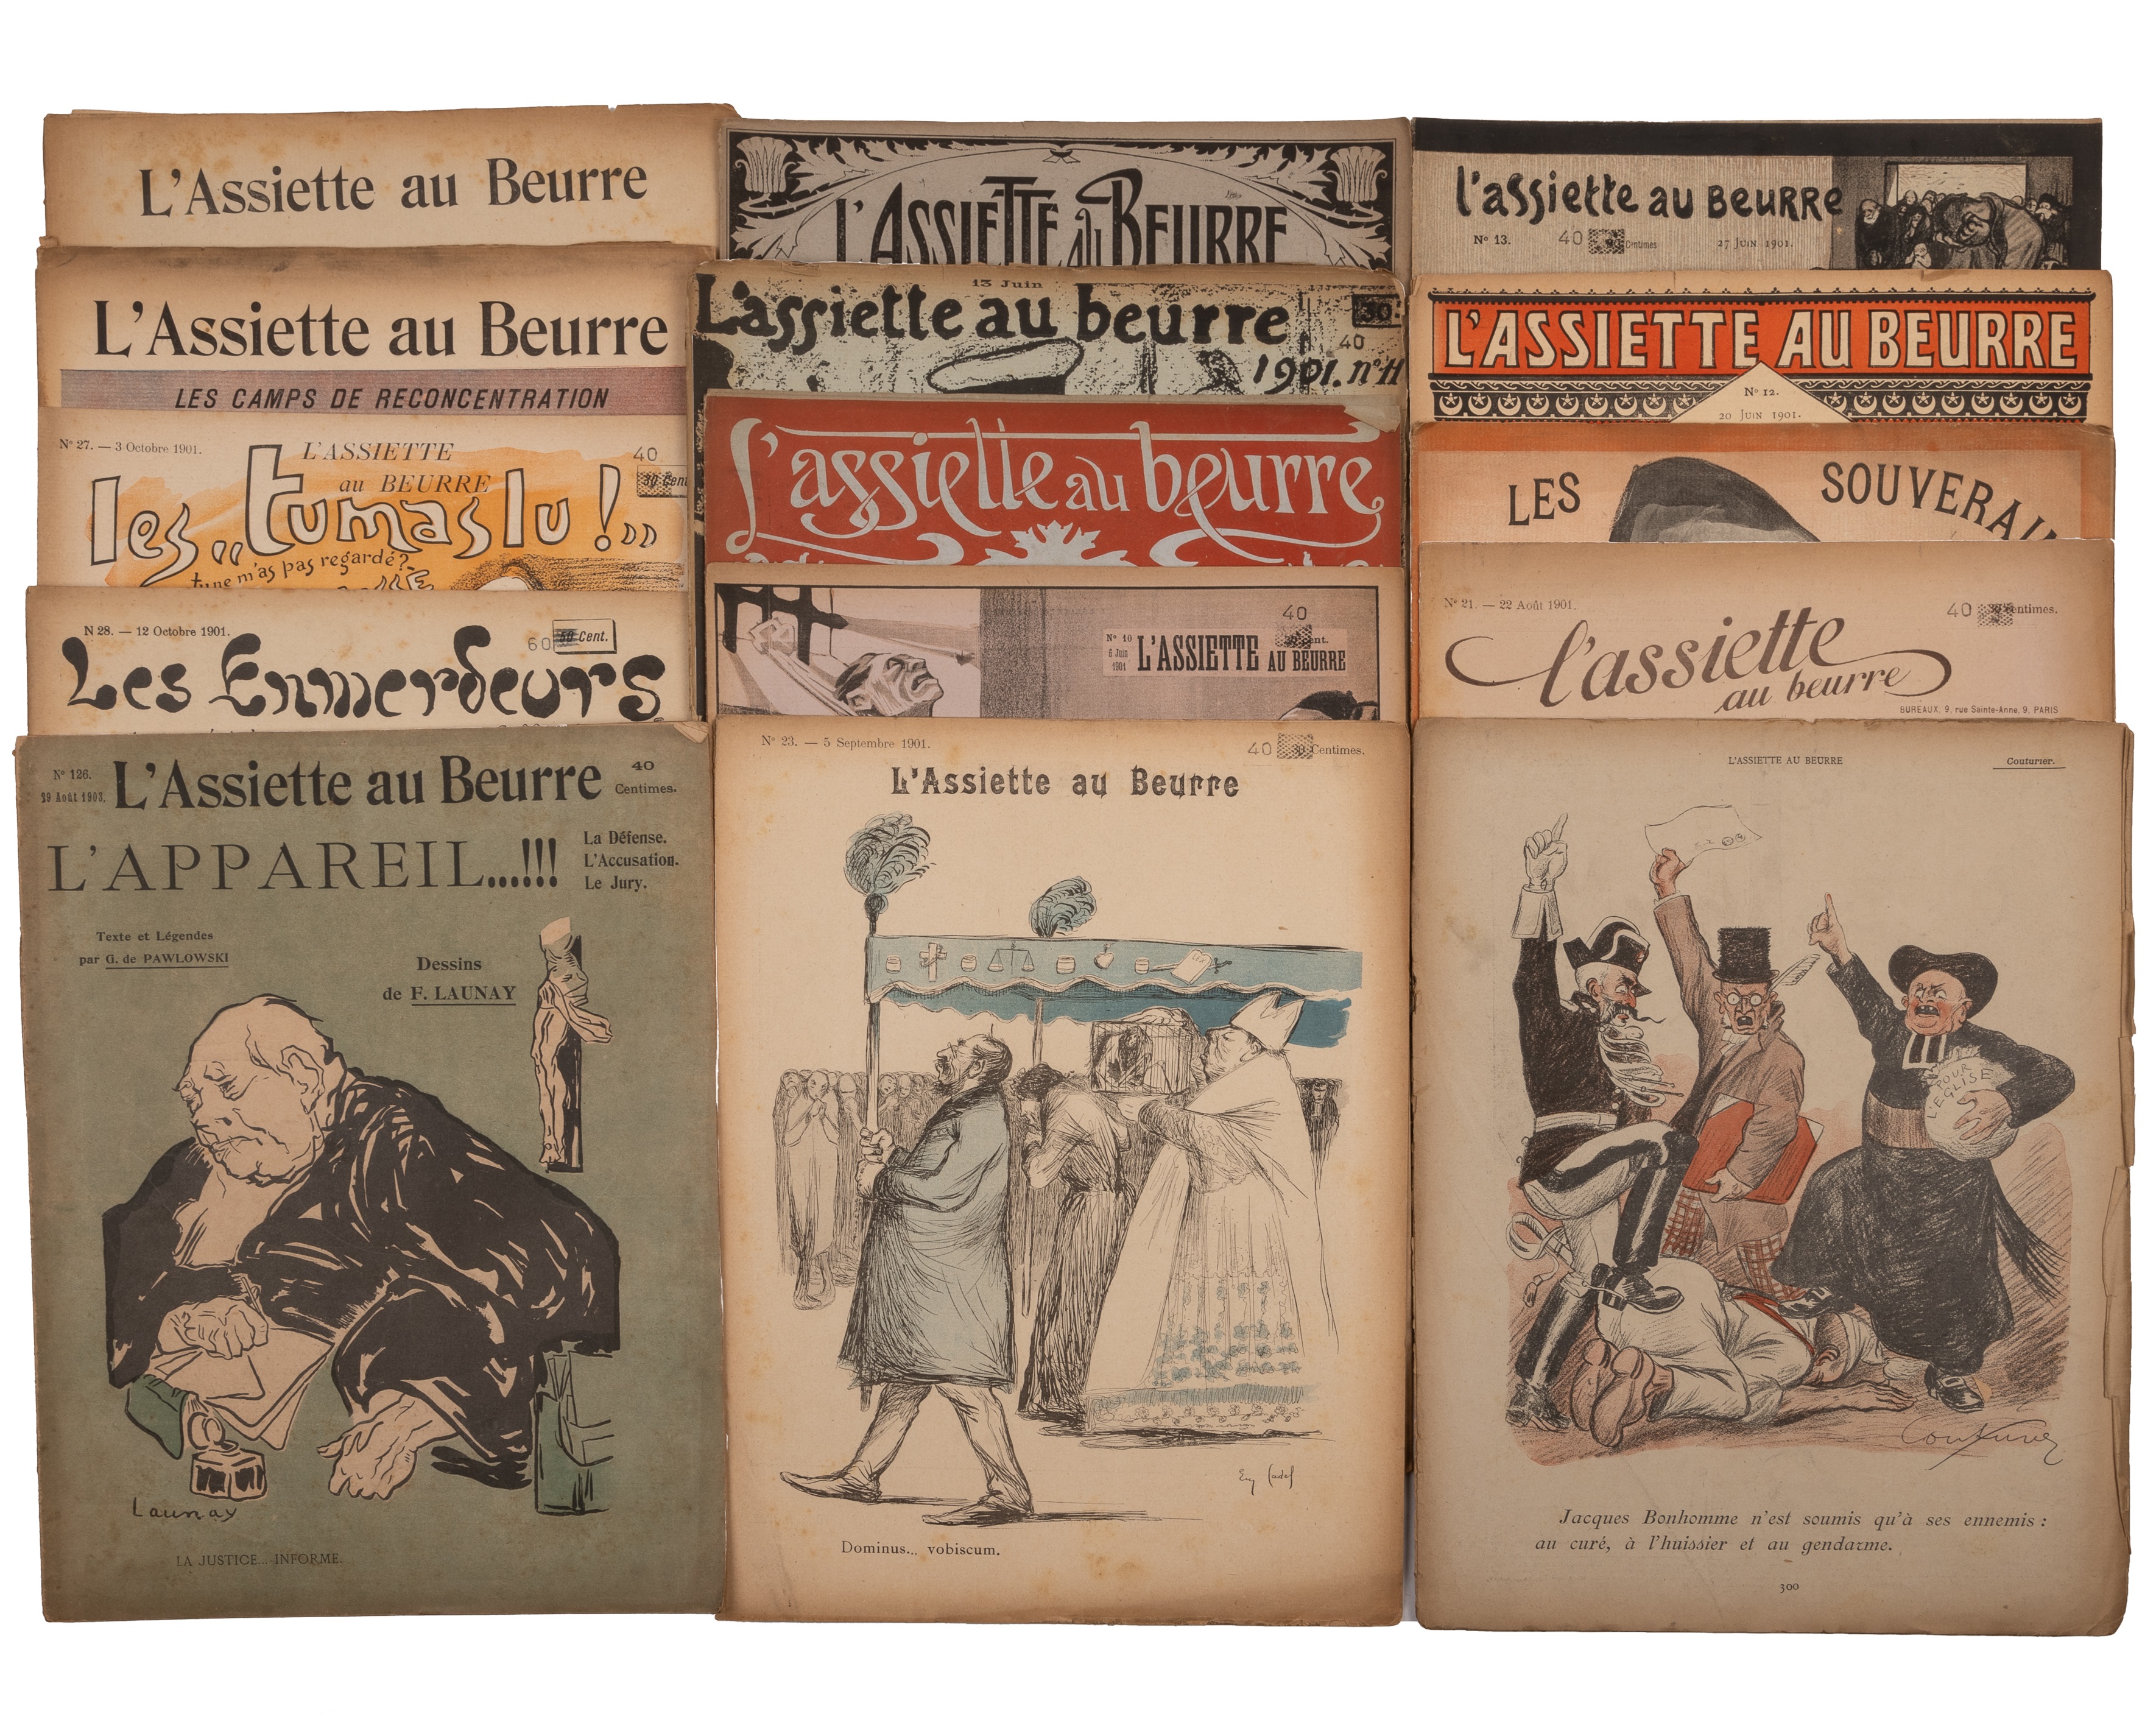 'L'Assiette au Beurre' approximately eighty editions of the French weekly satirical magazine 1901-